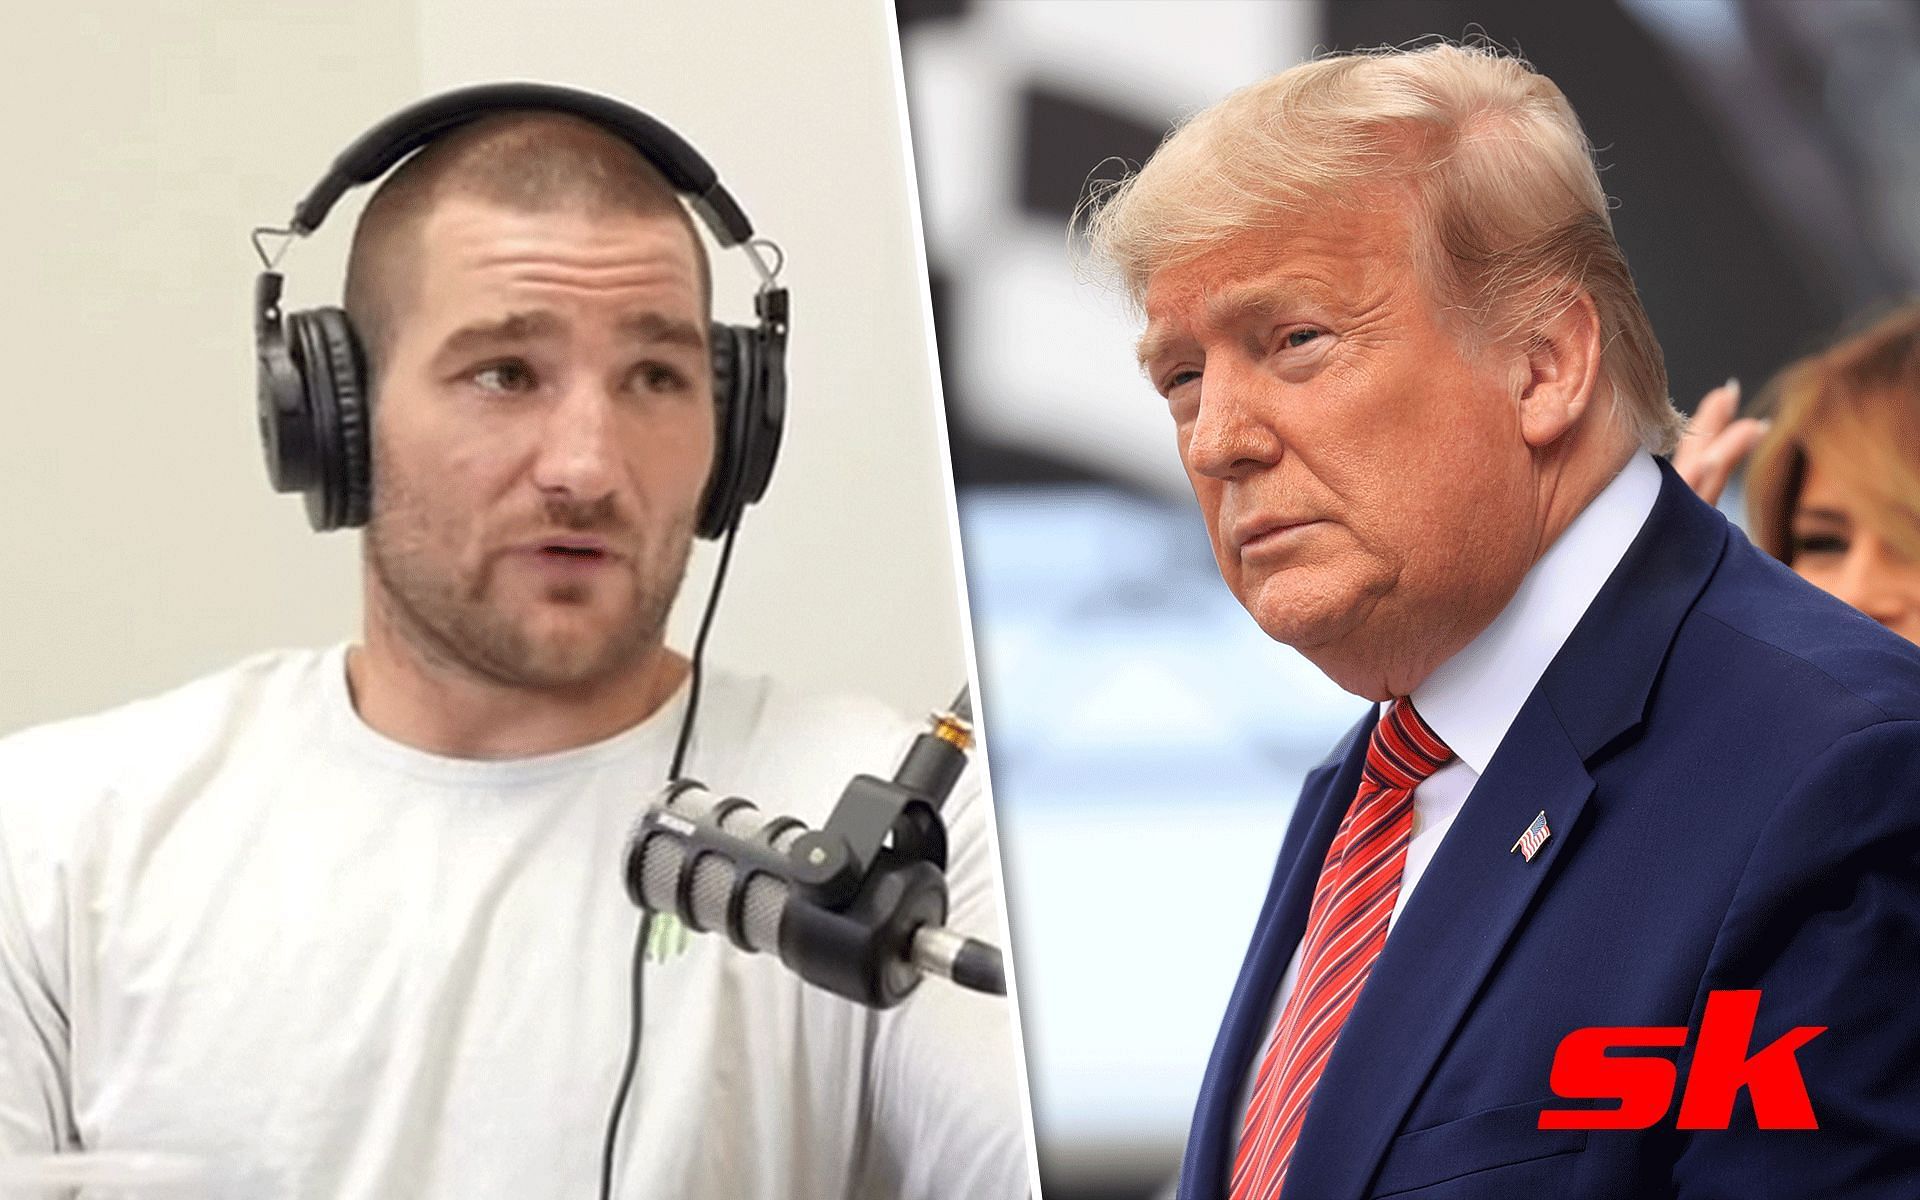 Sean Strickland (left) and Donald Trump (right) [Image credits: Getty Images and @strickland_mma on Instagram]